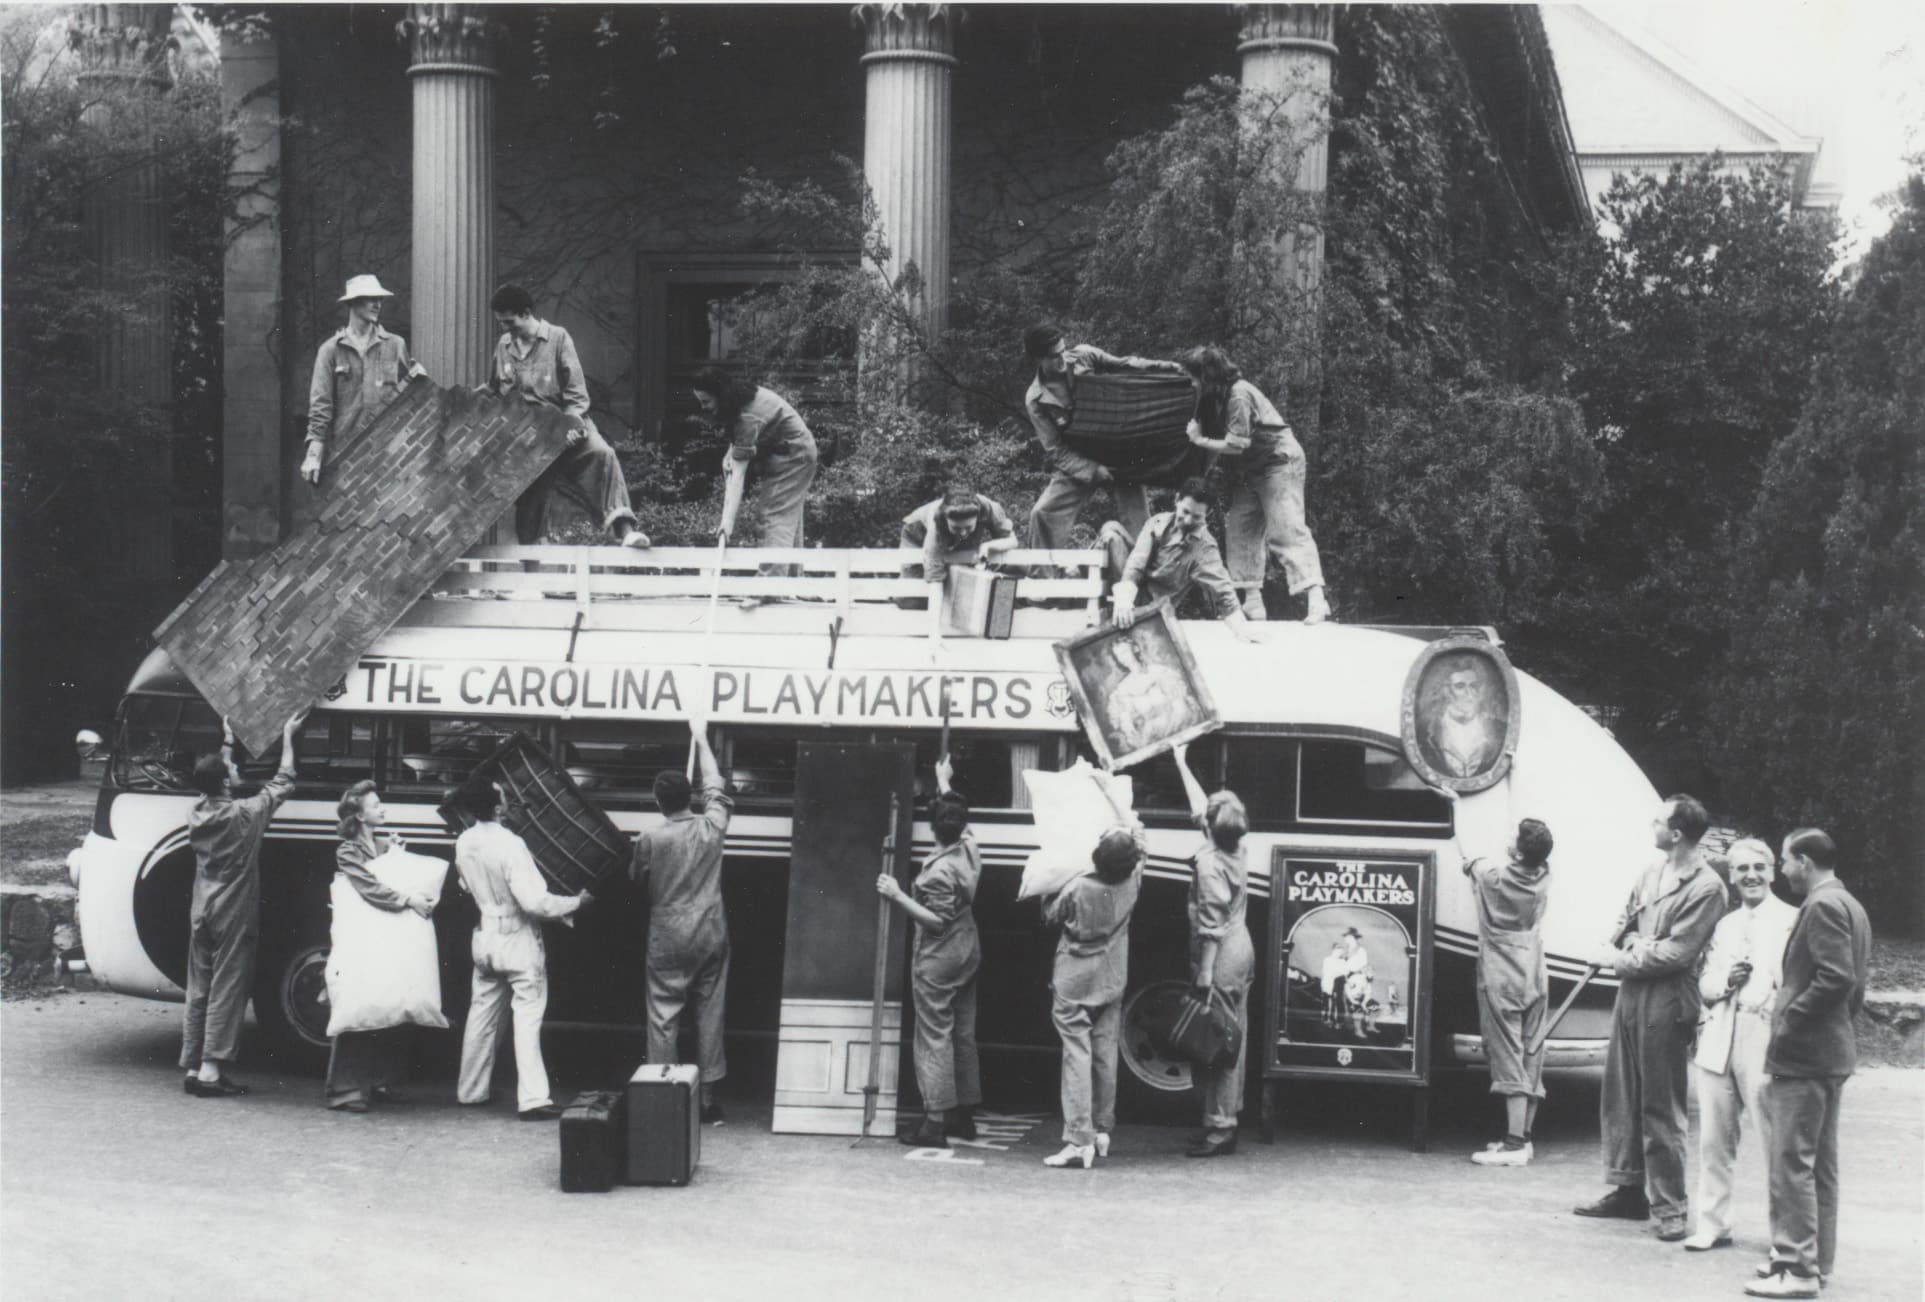 Members of the Carolina Playmakers load a bus with props before leaving on a tour in the fall of 1941. North Carolina Collection, University of North Carolina Library at Chapel Hill